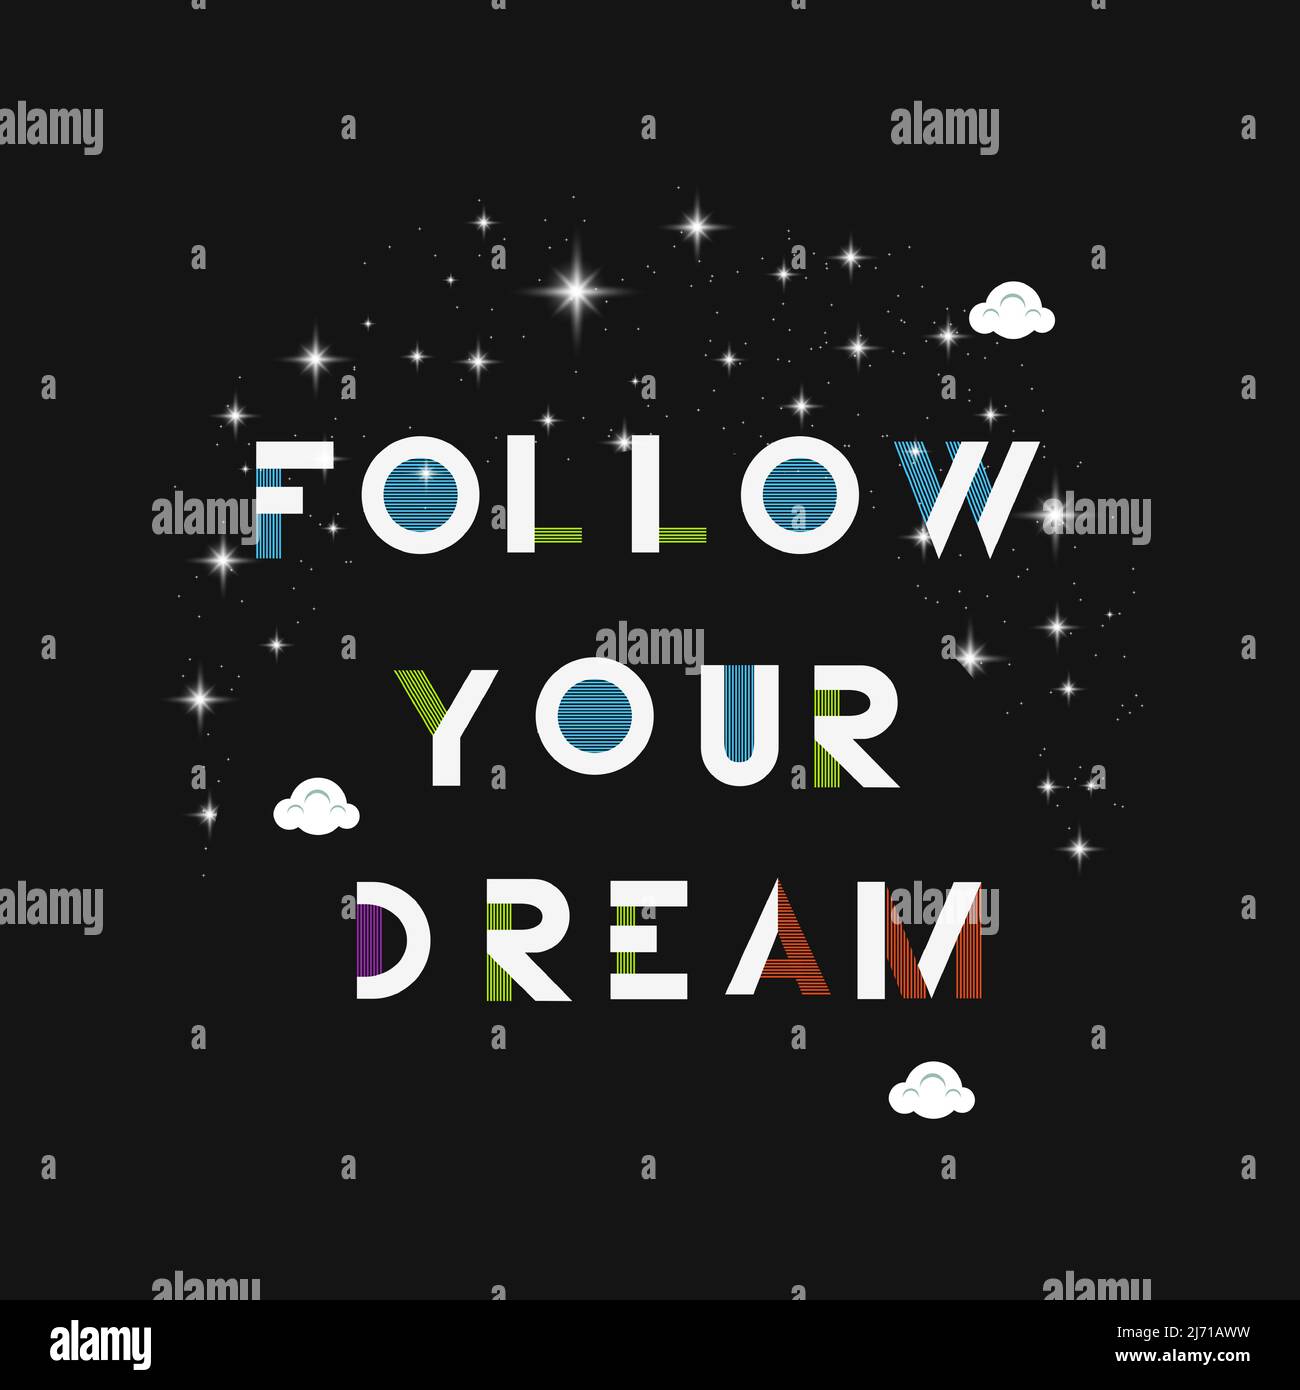 Follow Your Dream Inspirational Stylish Typography Stock Vector